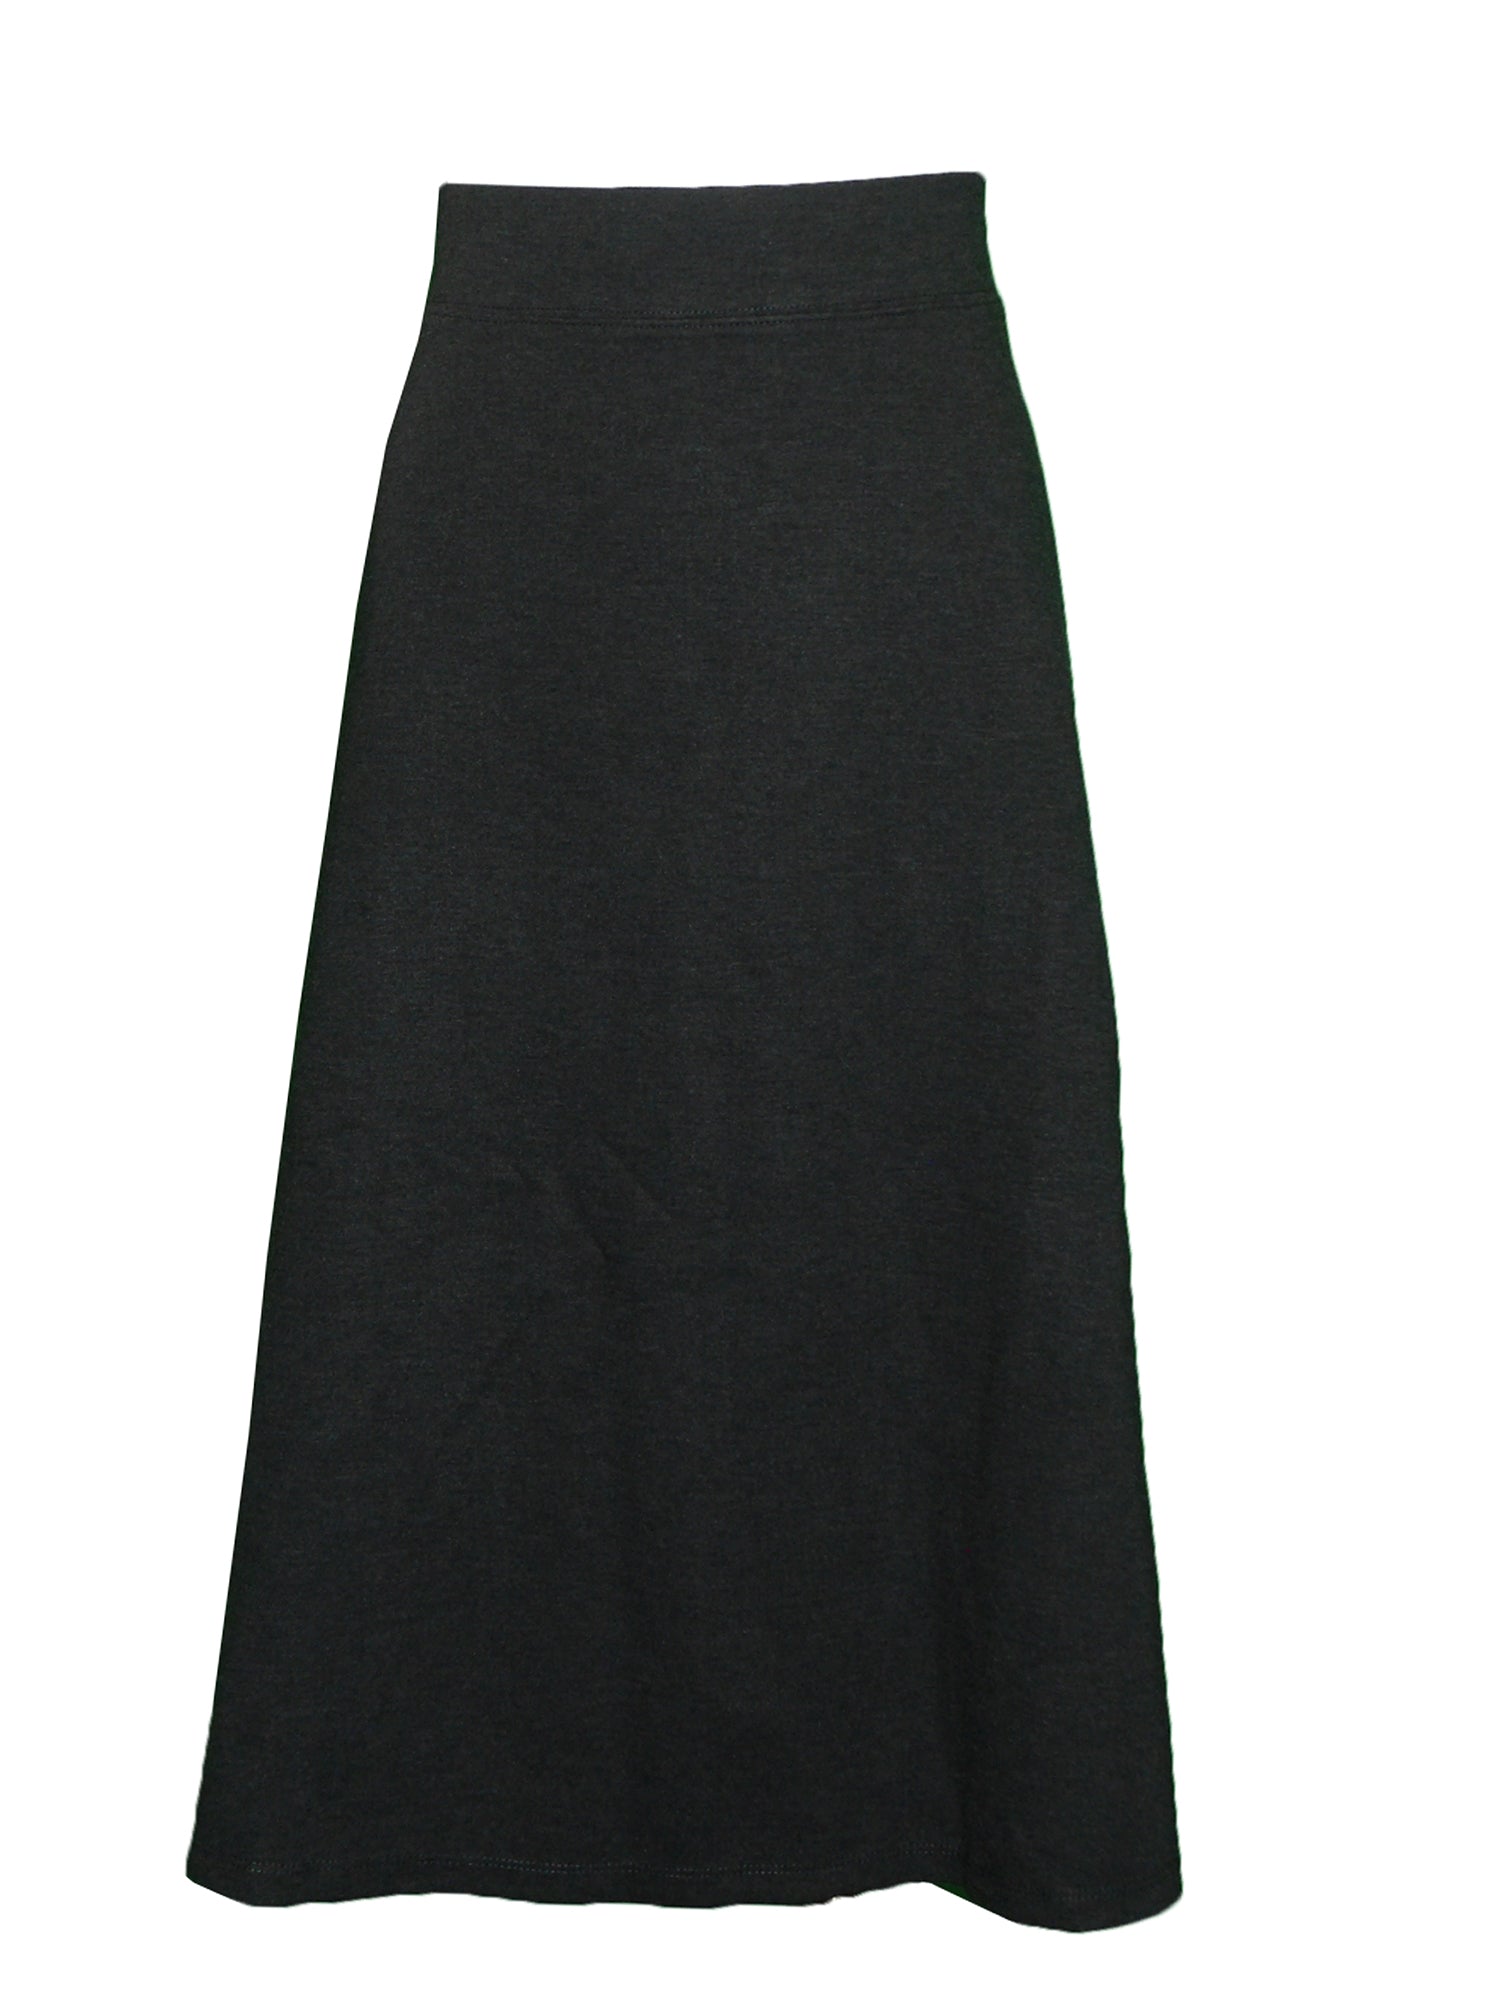 Wear and Flair Pure Line A-Line Skirt